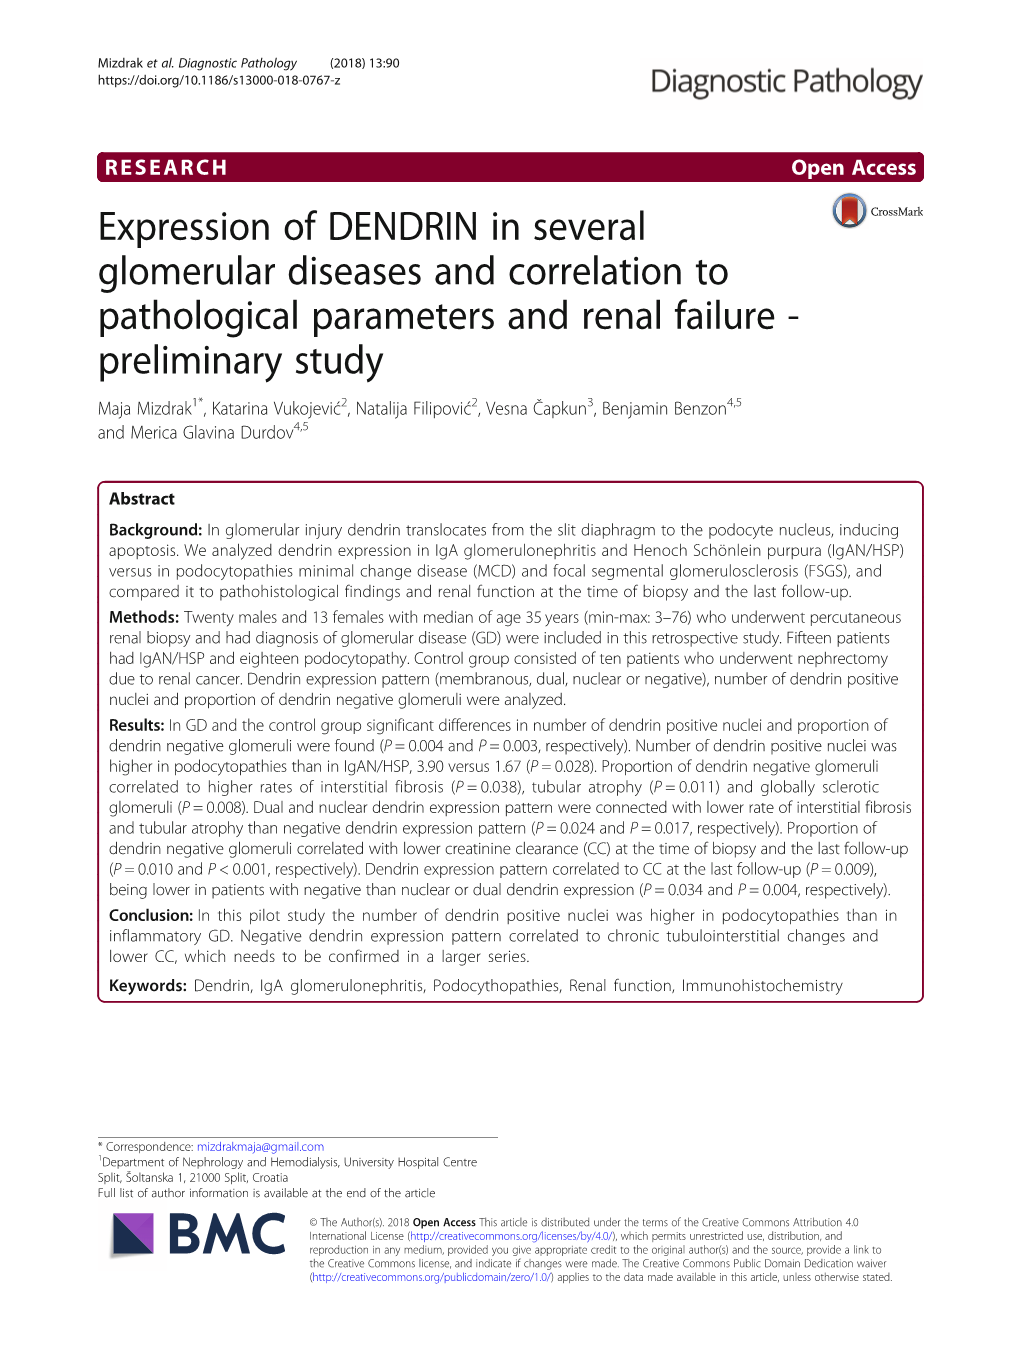 Expression of DENDRIN in Several Glomerular Diseases And